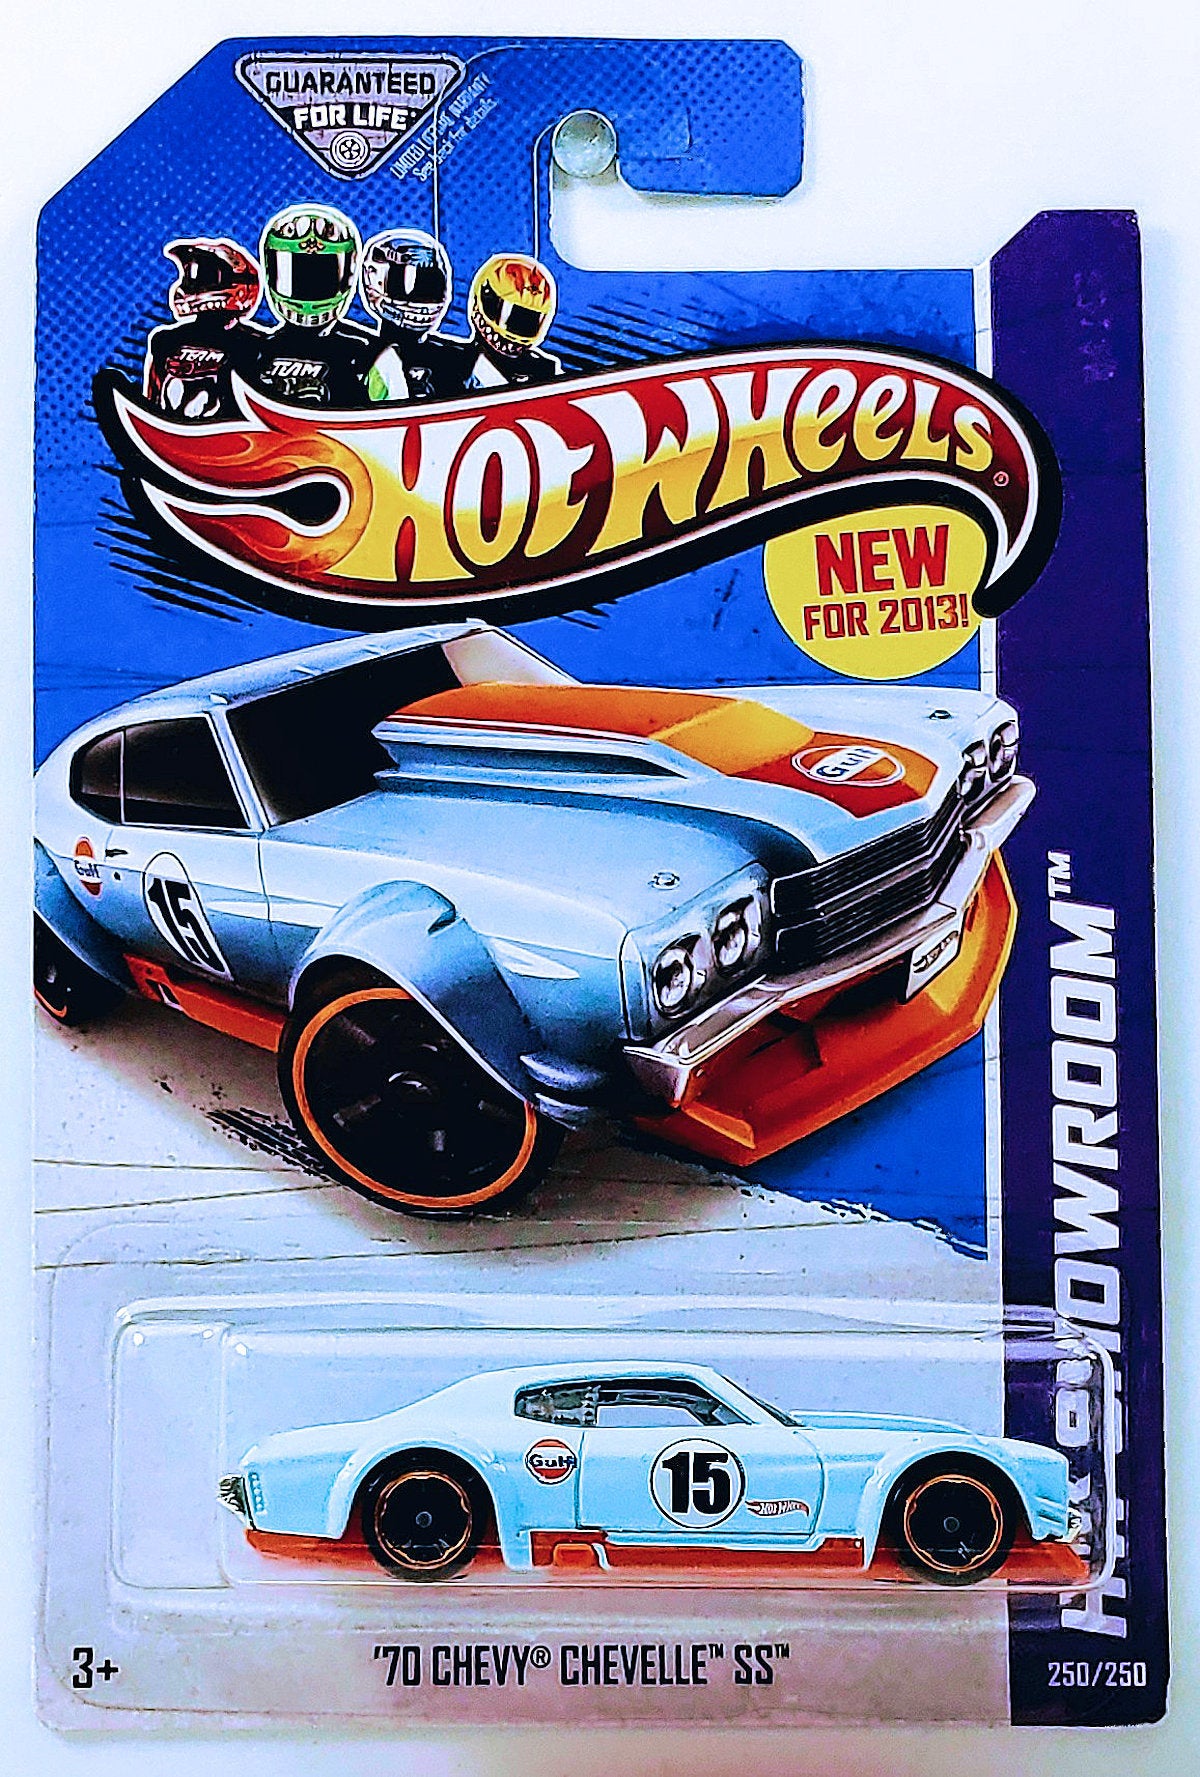 Hot Wheels 2013 - Collector # 250/250 - HW Showroom / HW Performance / New Models - '70 Chevy Chevelle SS - Sky Blue / Gulf Oil Racing - USA Card